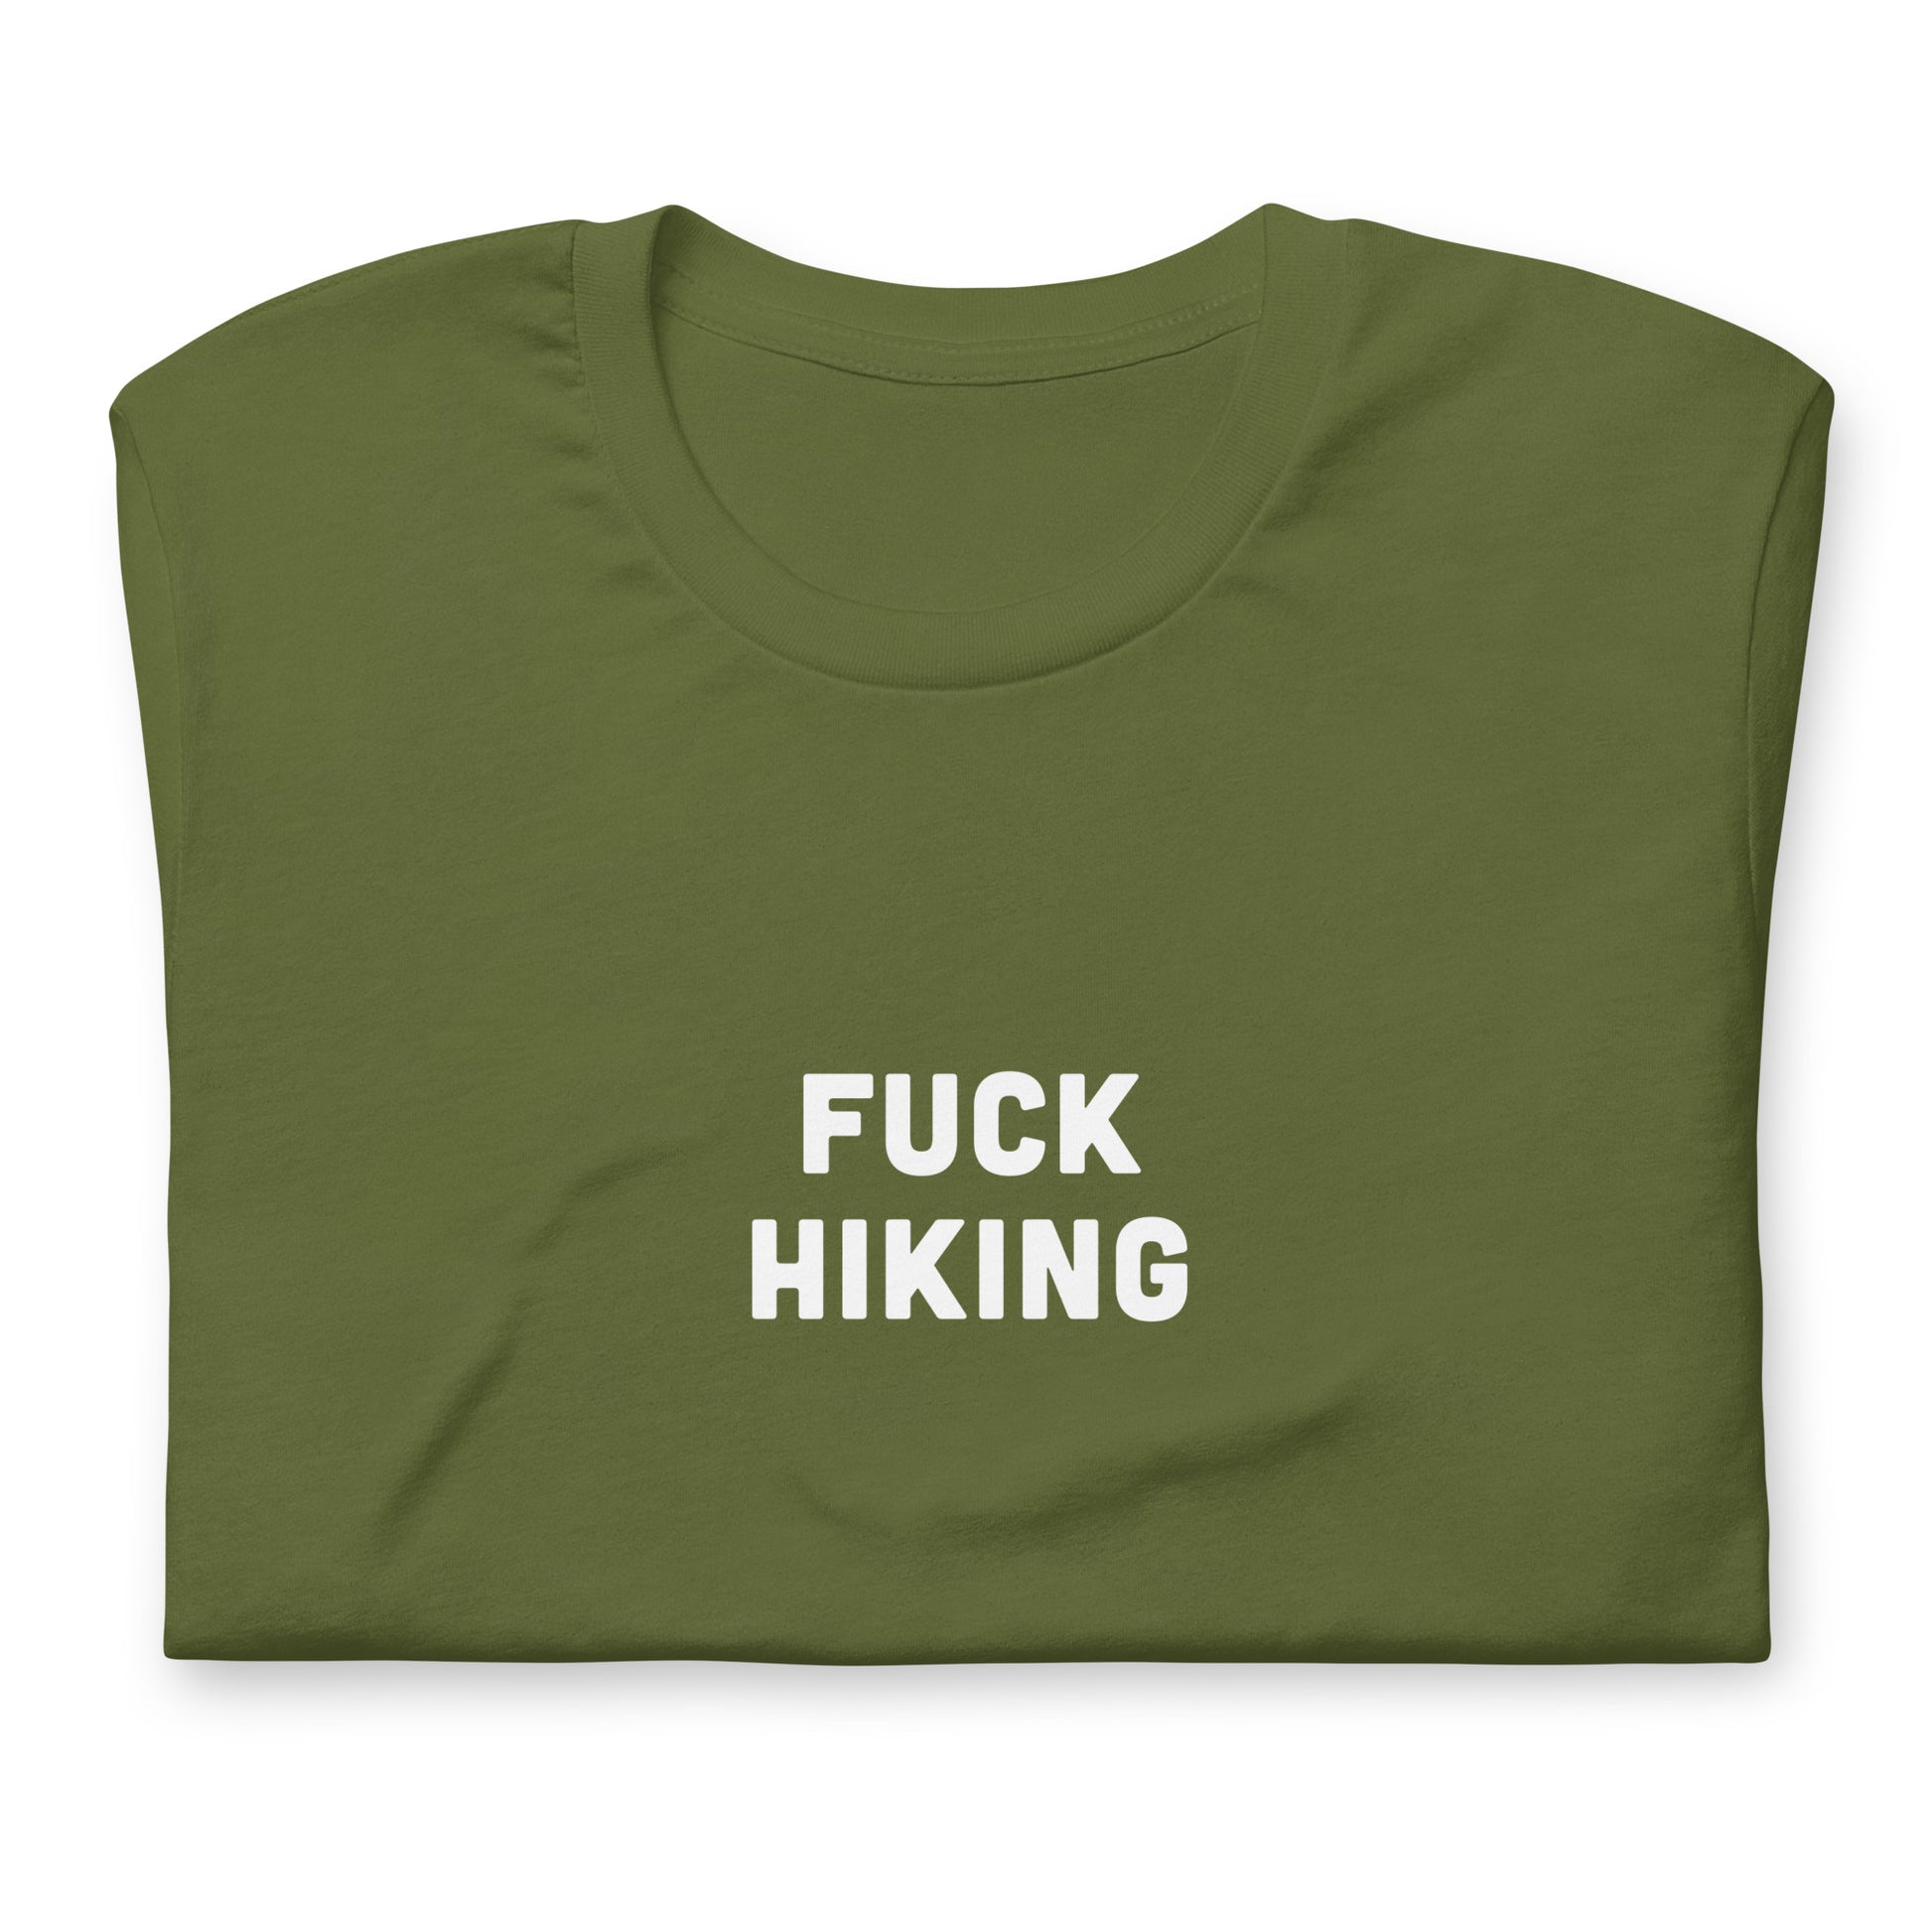 Fuck Hiking T-Shirt Size S Color Navy